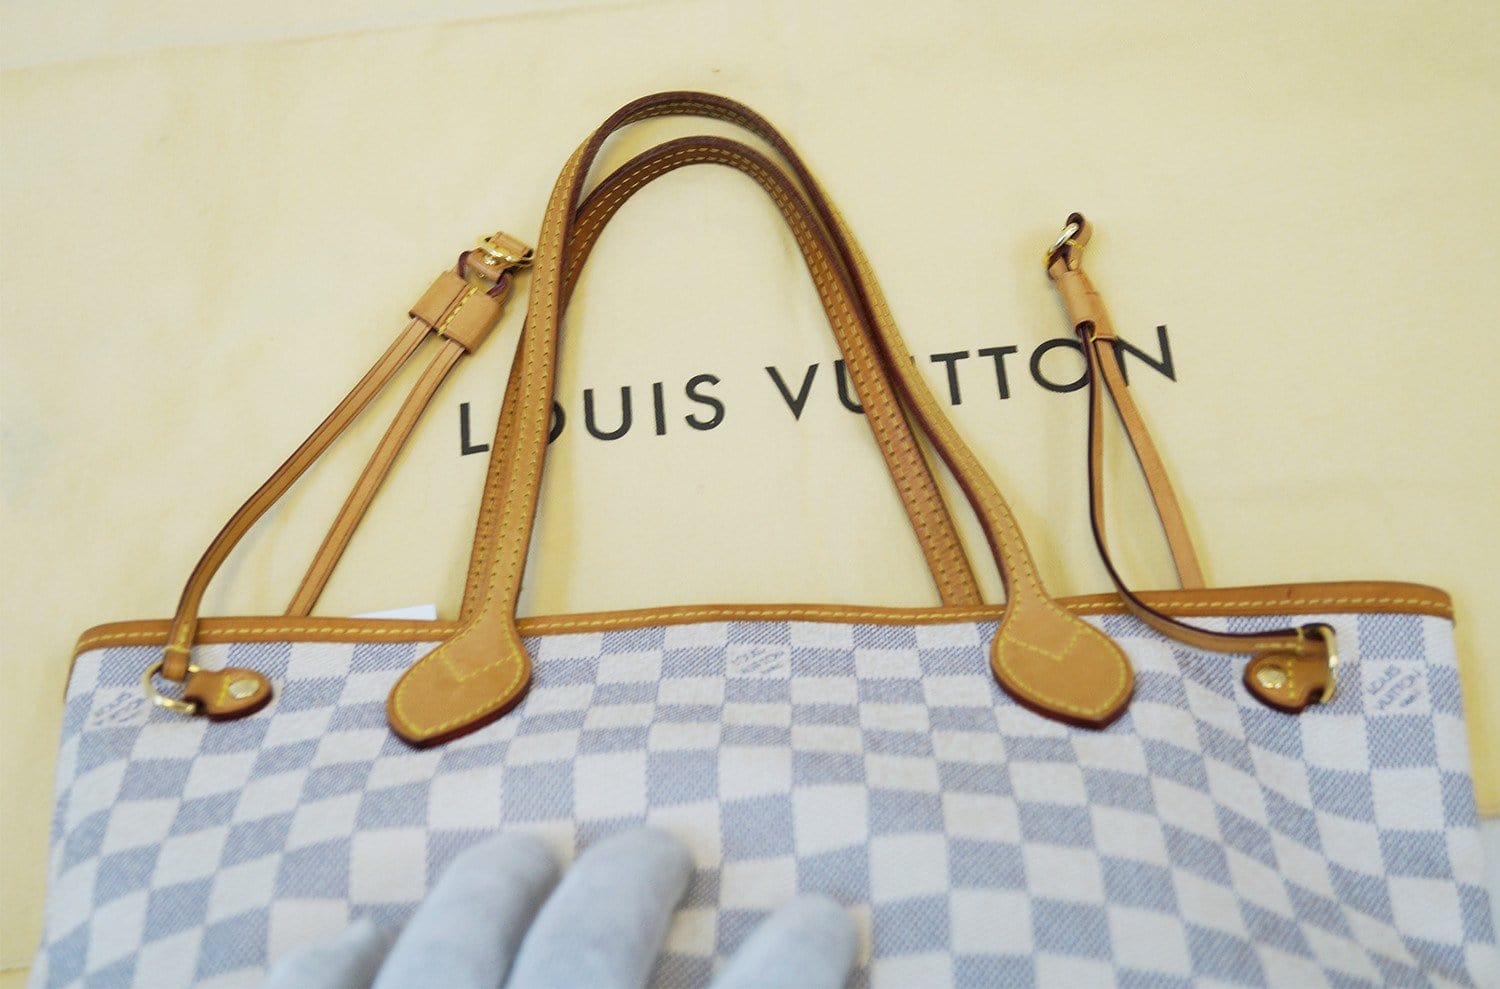 My New Bag: Louis Vuitton Neverfull PM in Damier Ebene  Casual  fashionista, Fashion, Louis vuitton neverfull pm